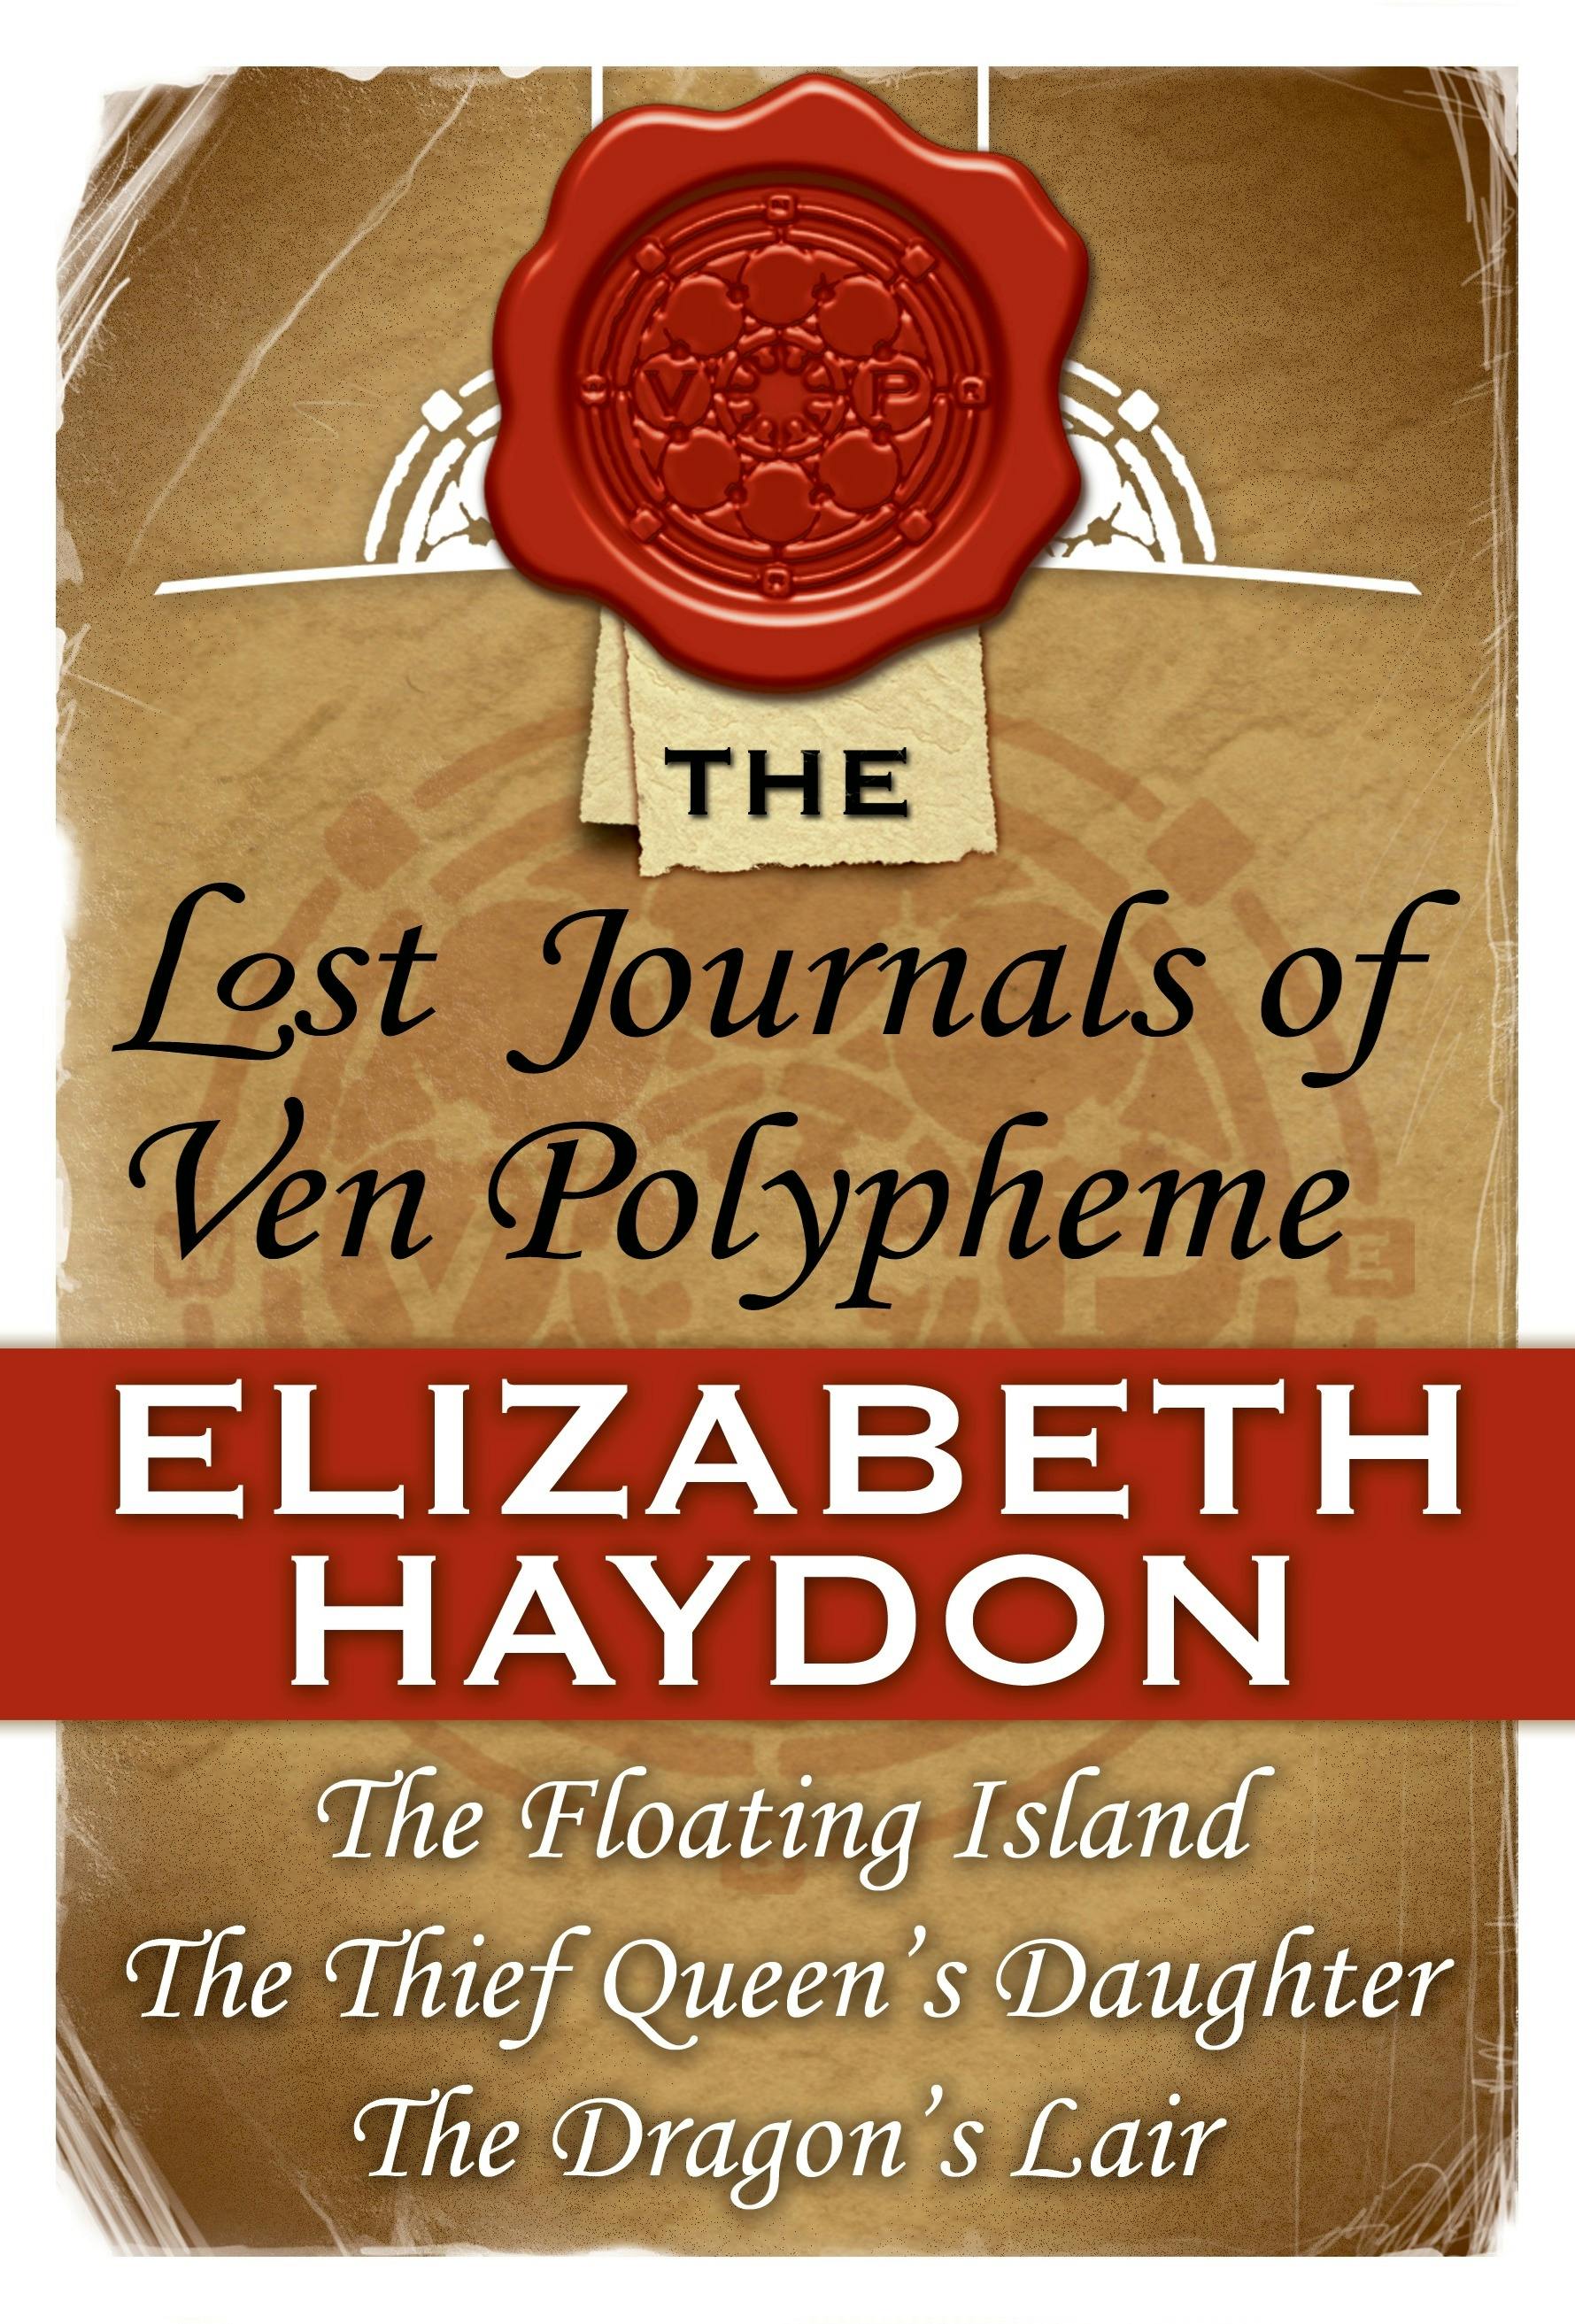 Cover for the book titled as: The Lost Journals of Ven Polypheme